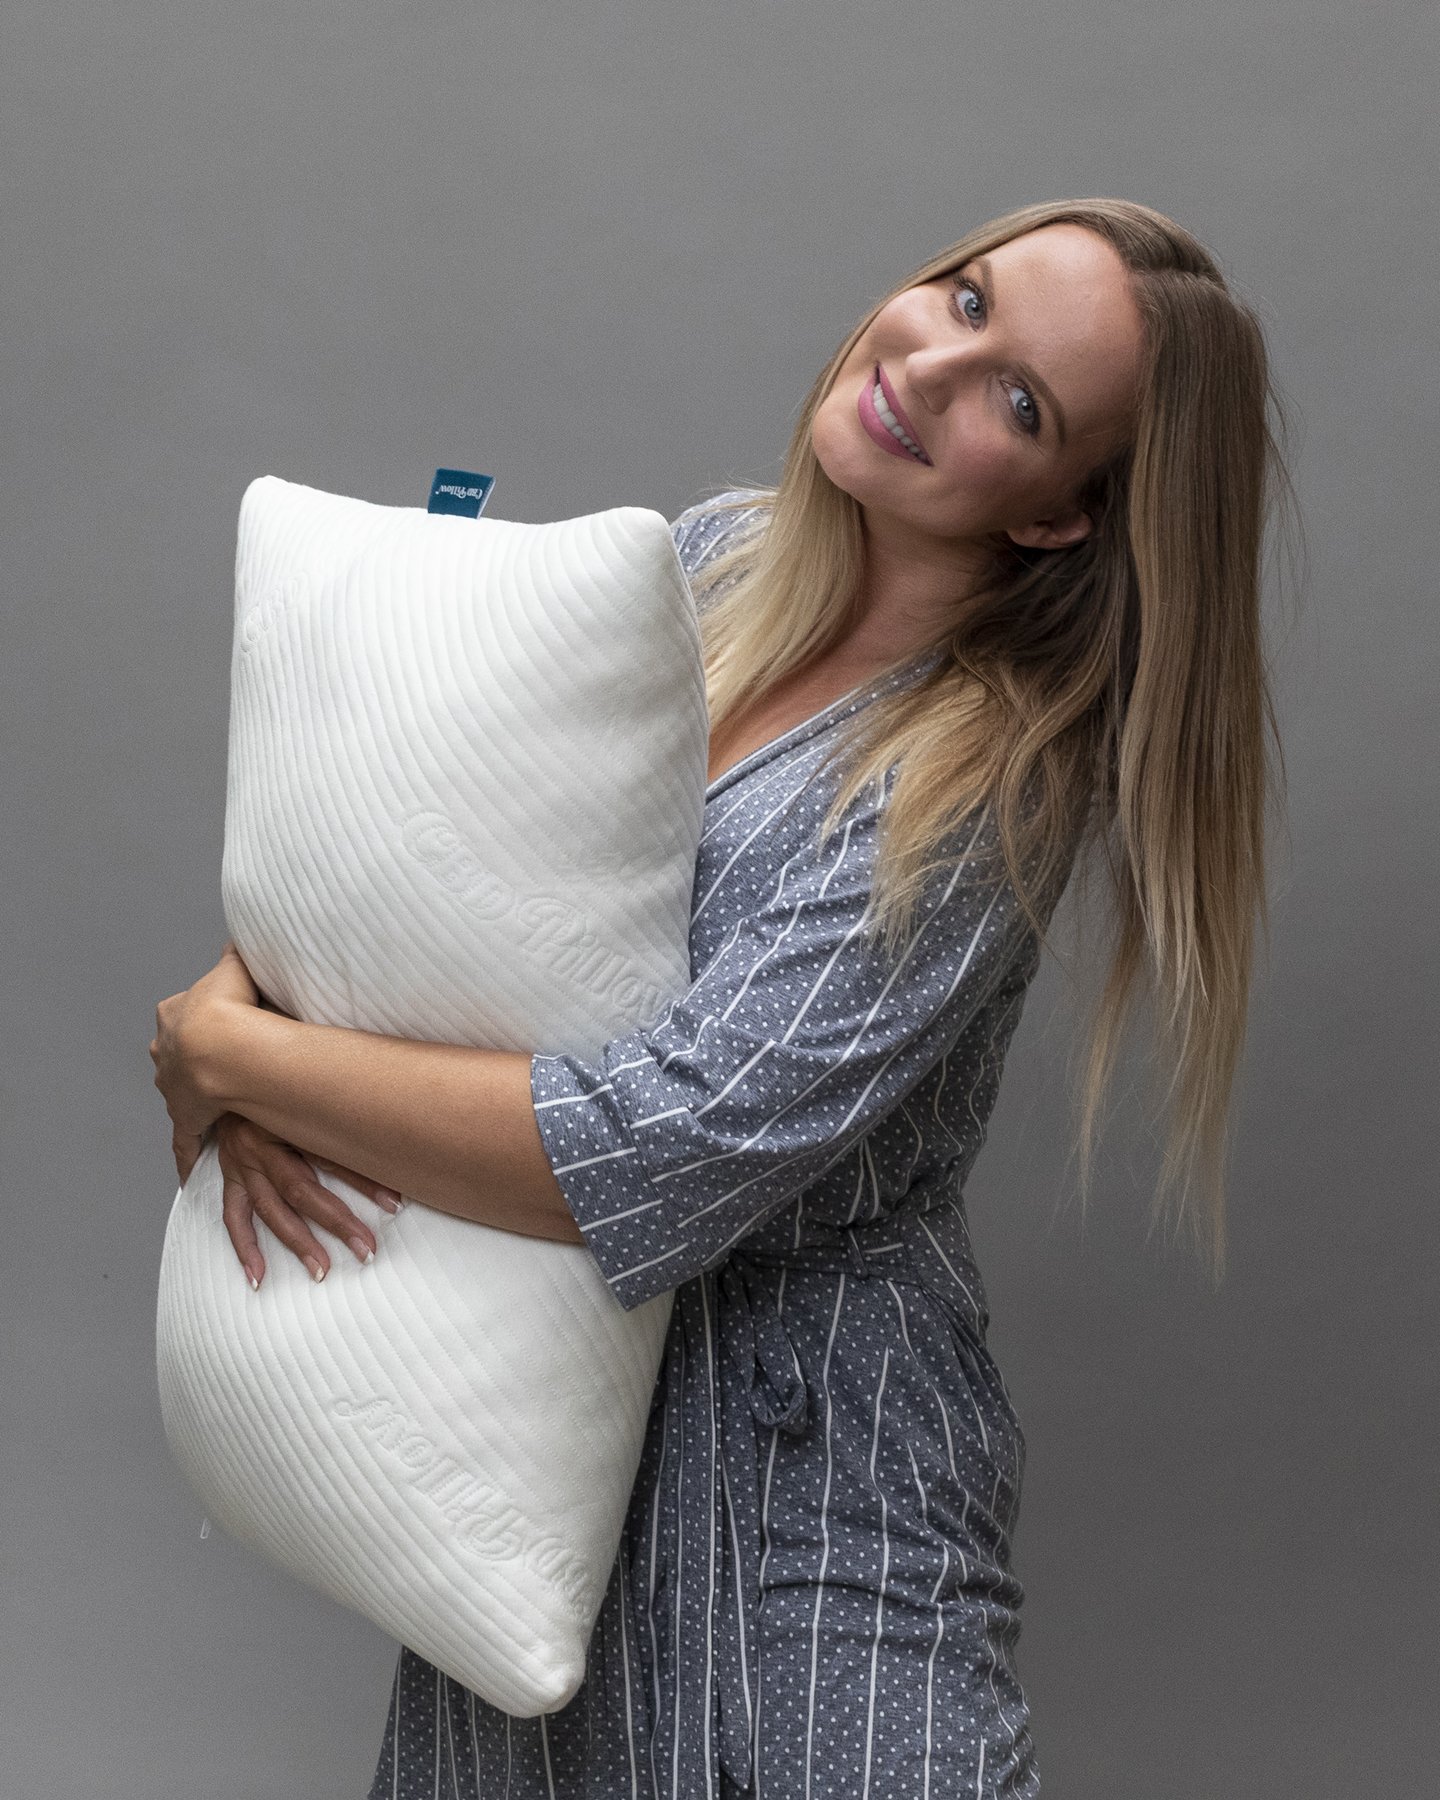 is the cbd pillow comfortable?